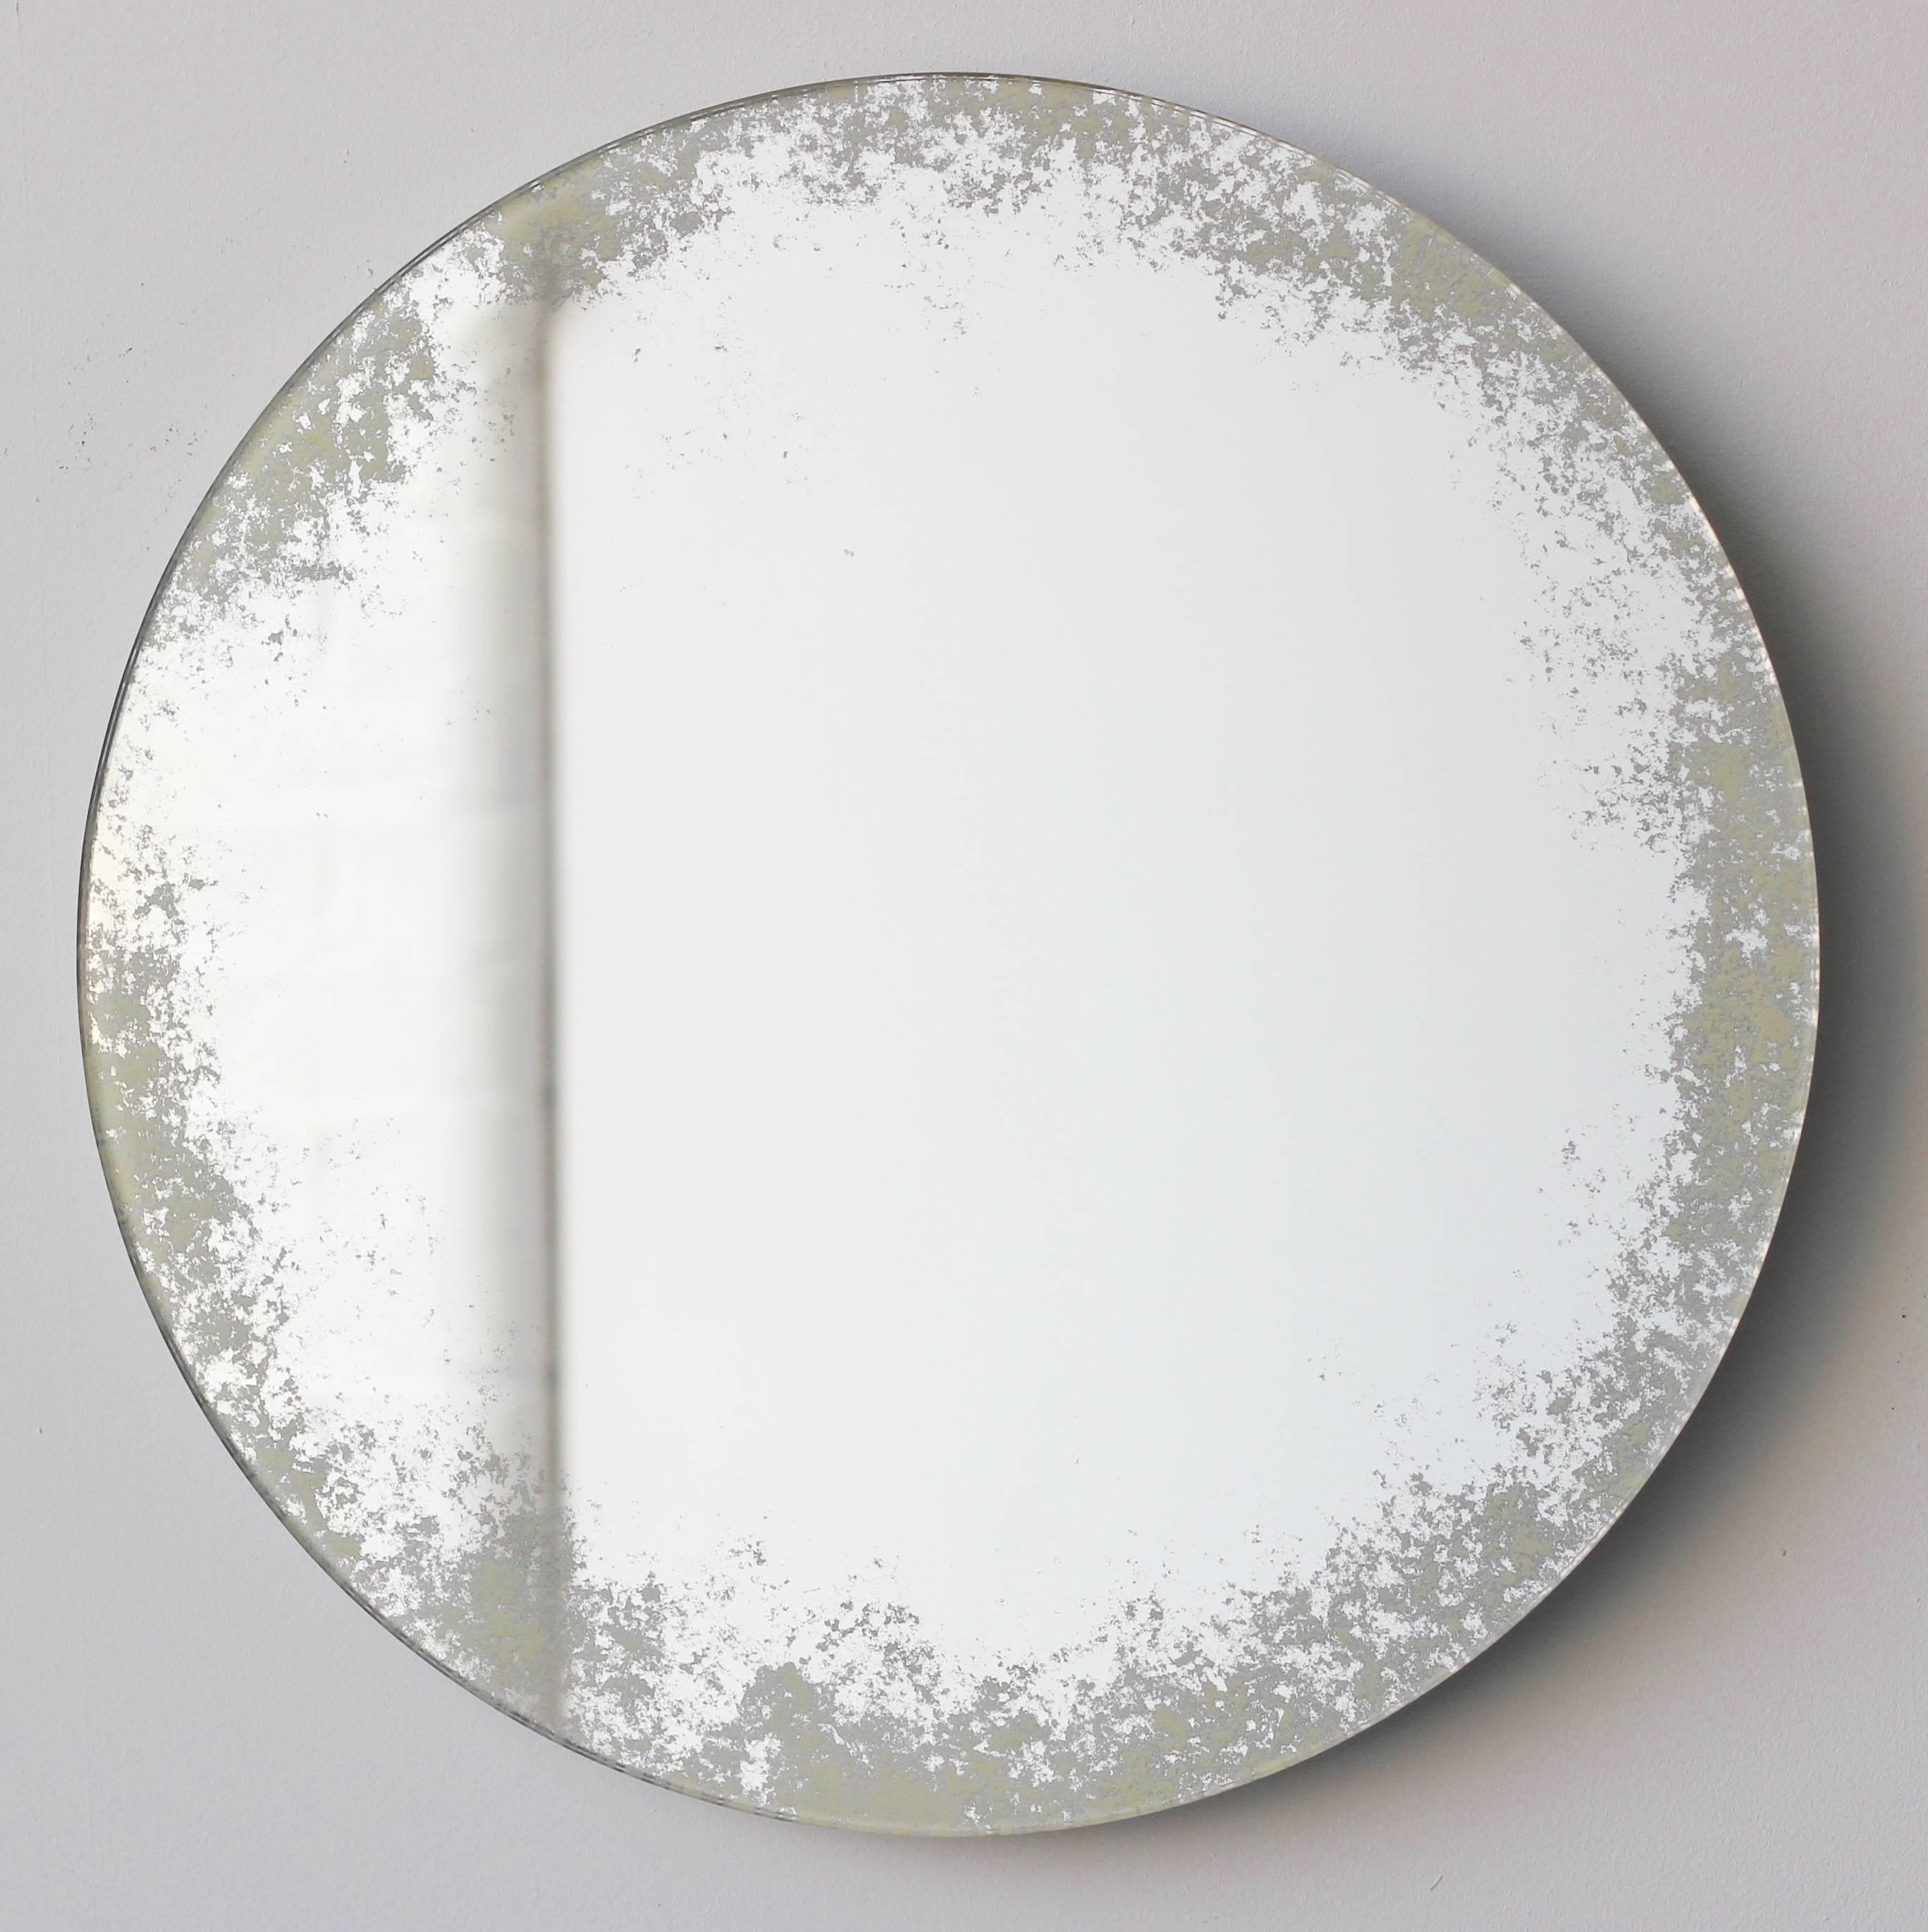 Delightful handcrafted silver mirror with an ivory antiqued finish around the edges.

The hand polishing of the edges and hand finish of the antiqued effect give it a very charming and classic crafted look, while still looking beautiful in a modern